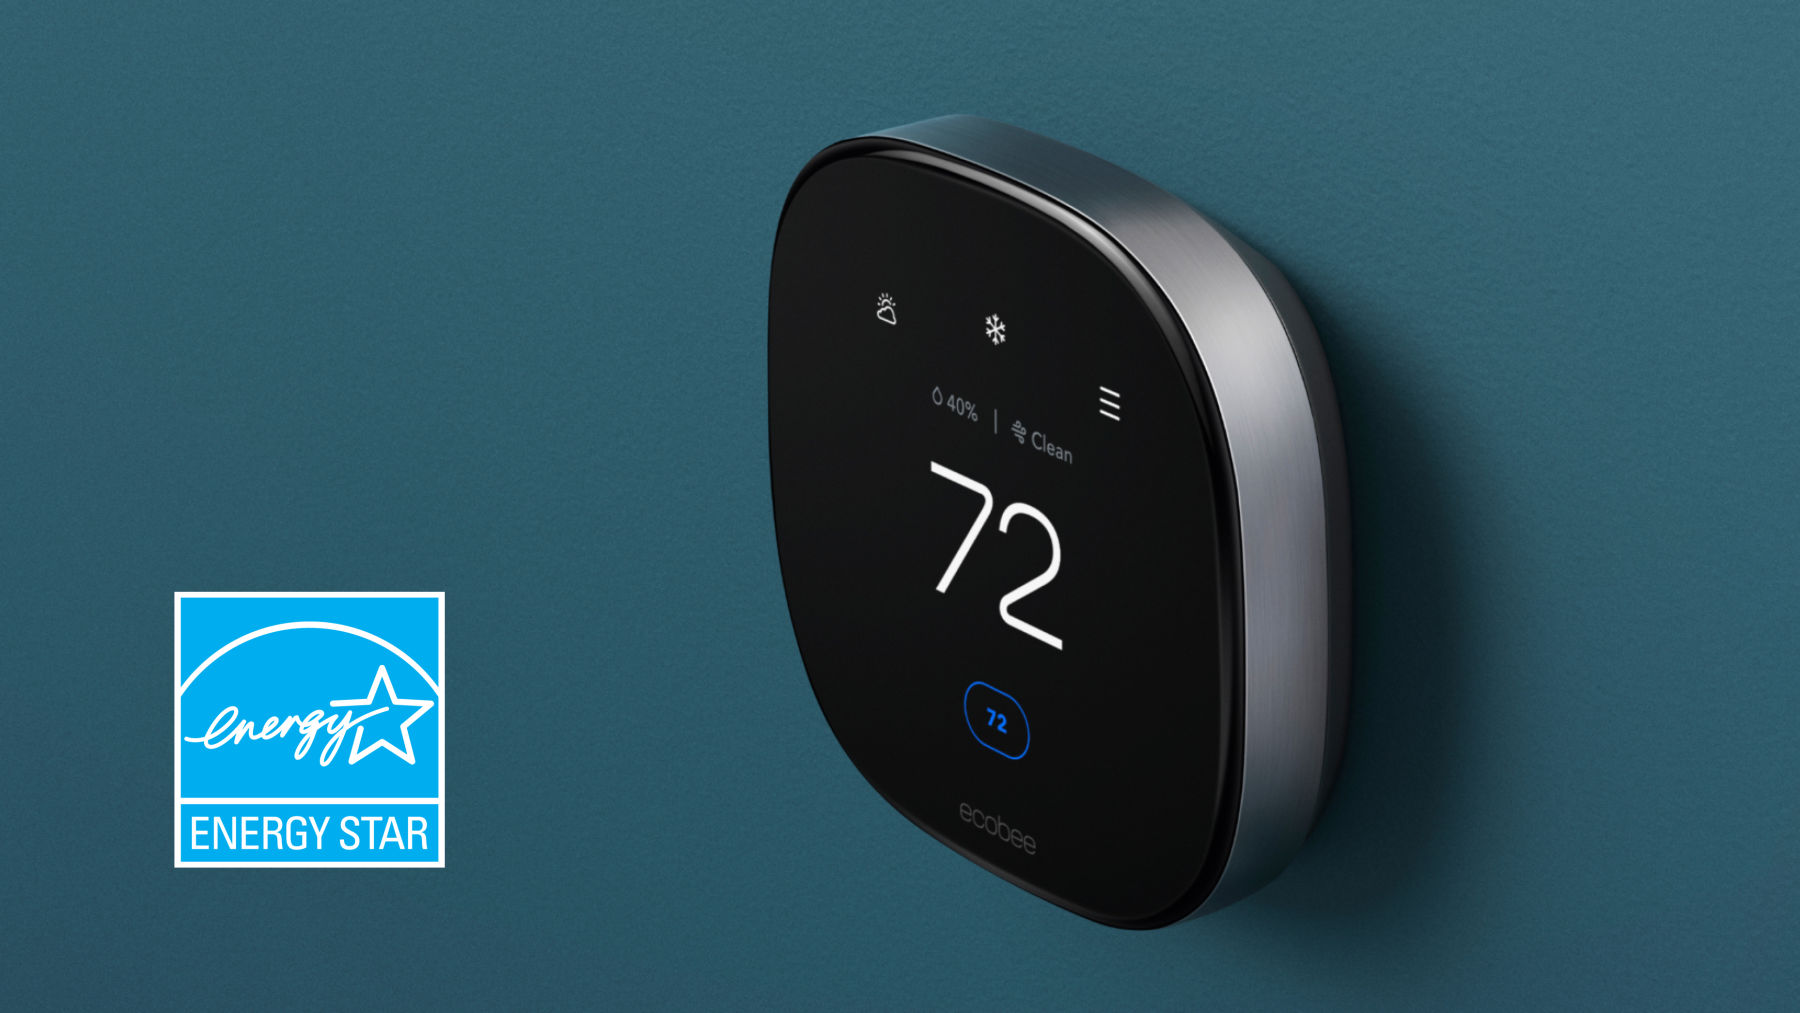 Energy Star certification and smart thermostat